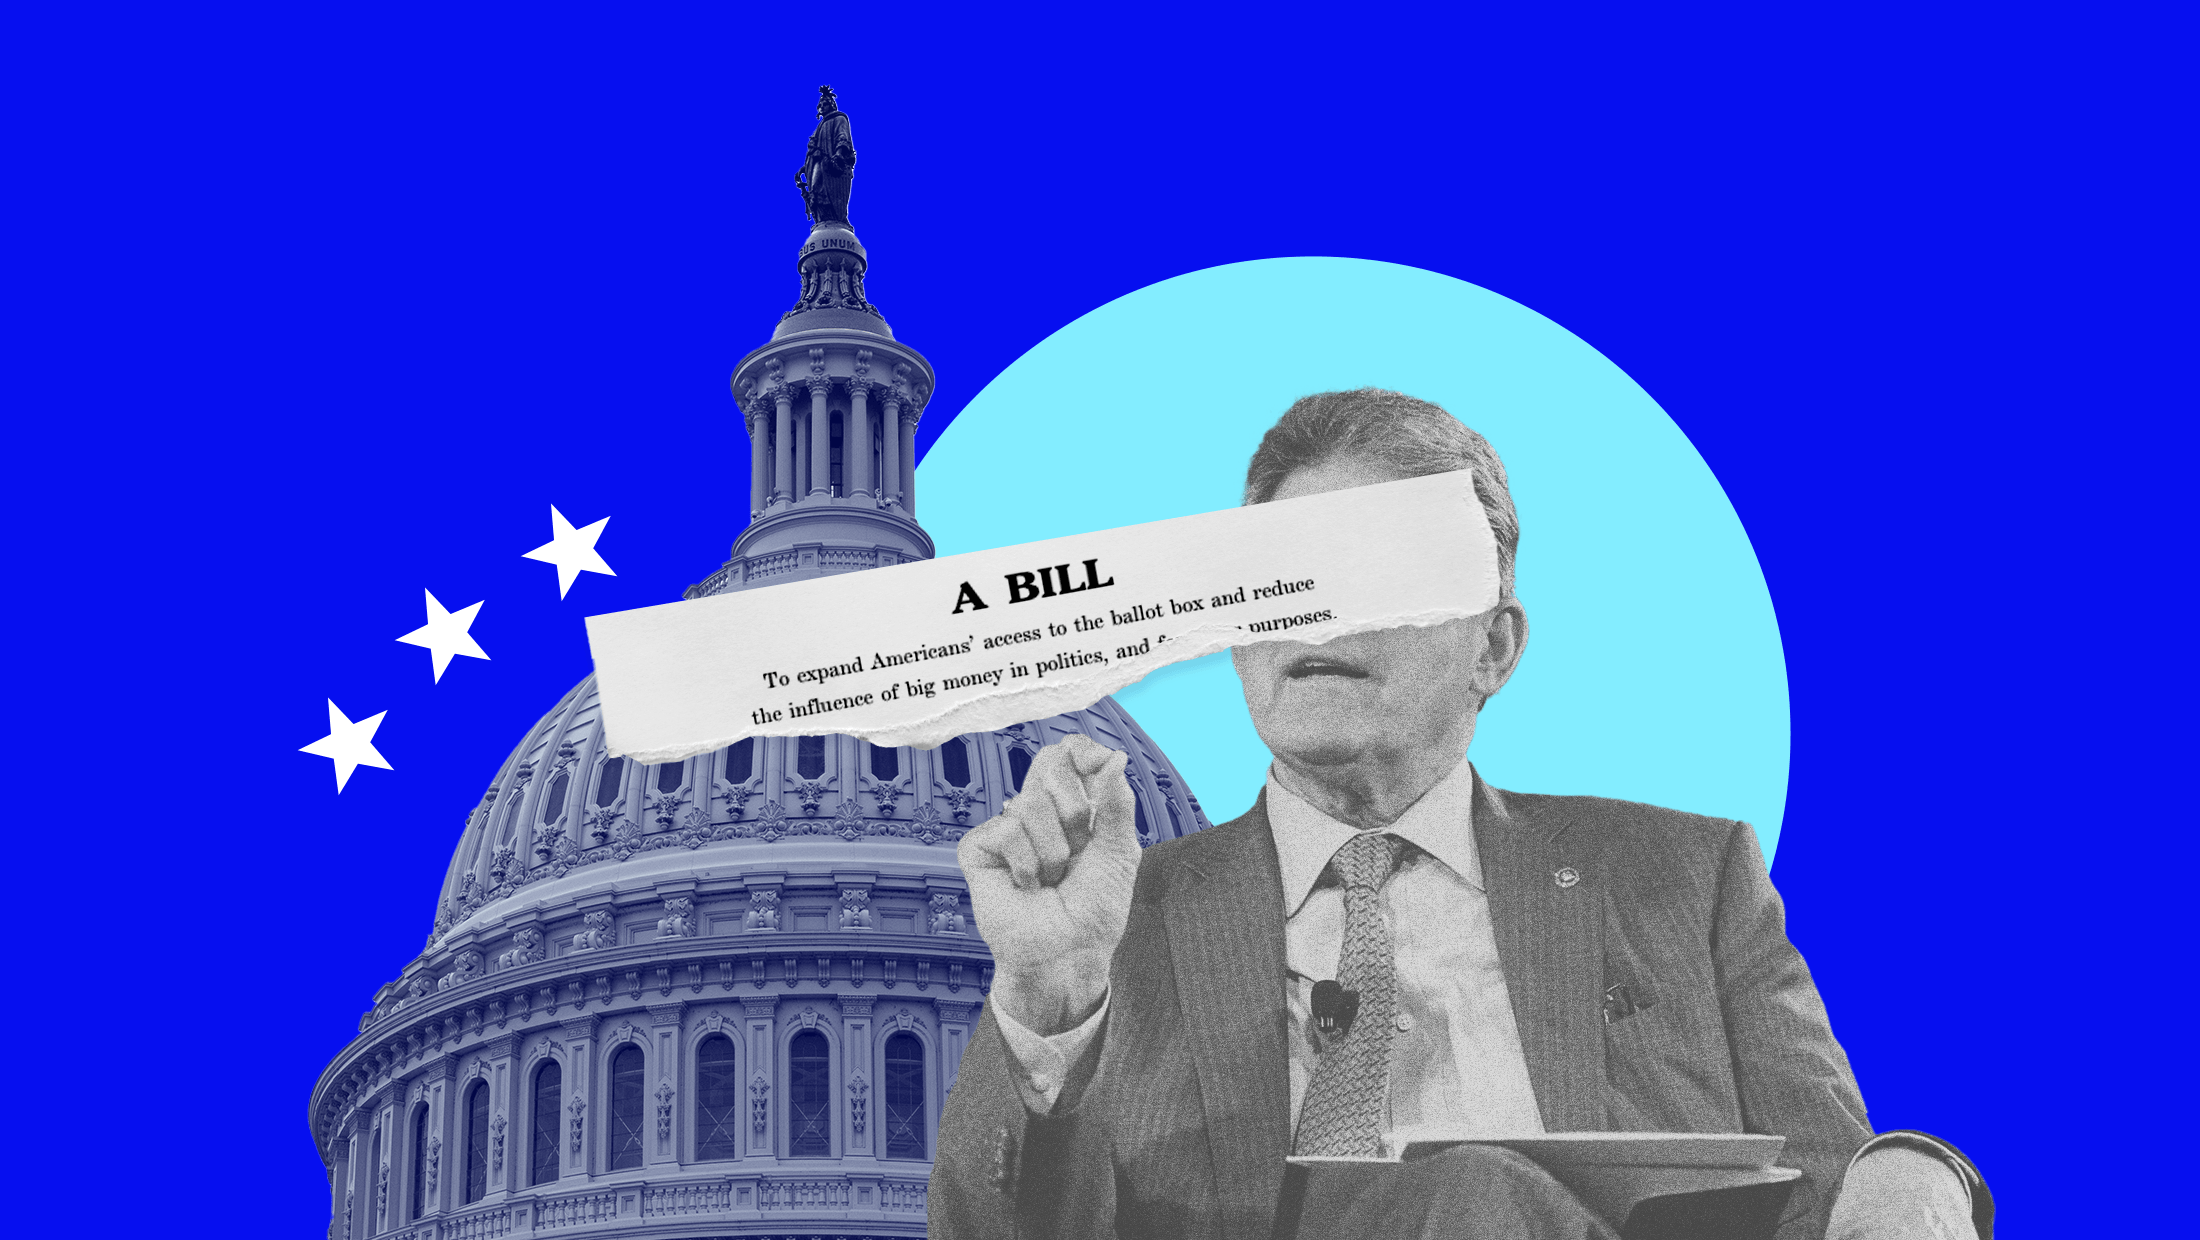 A collage featuring Senator Joe Machin, the U.S. Capitol and a snippet of text from the Freedom to Vote Act that reads, "A BILL TO EXPAND AMERICANS' ACCESS TO THE BALLOT BOX AND REDUCE THE INFLUENCE OF BIG MONEY IN POLITICS AND FOR OTHER PURPOSES"